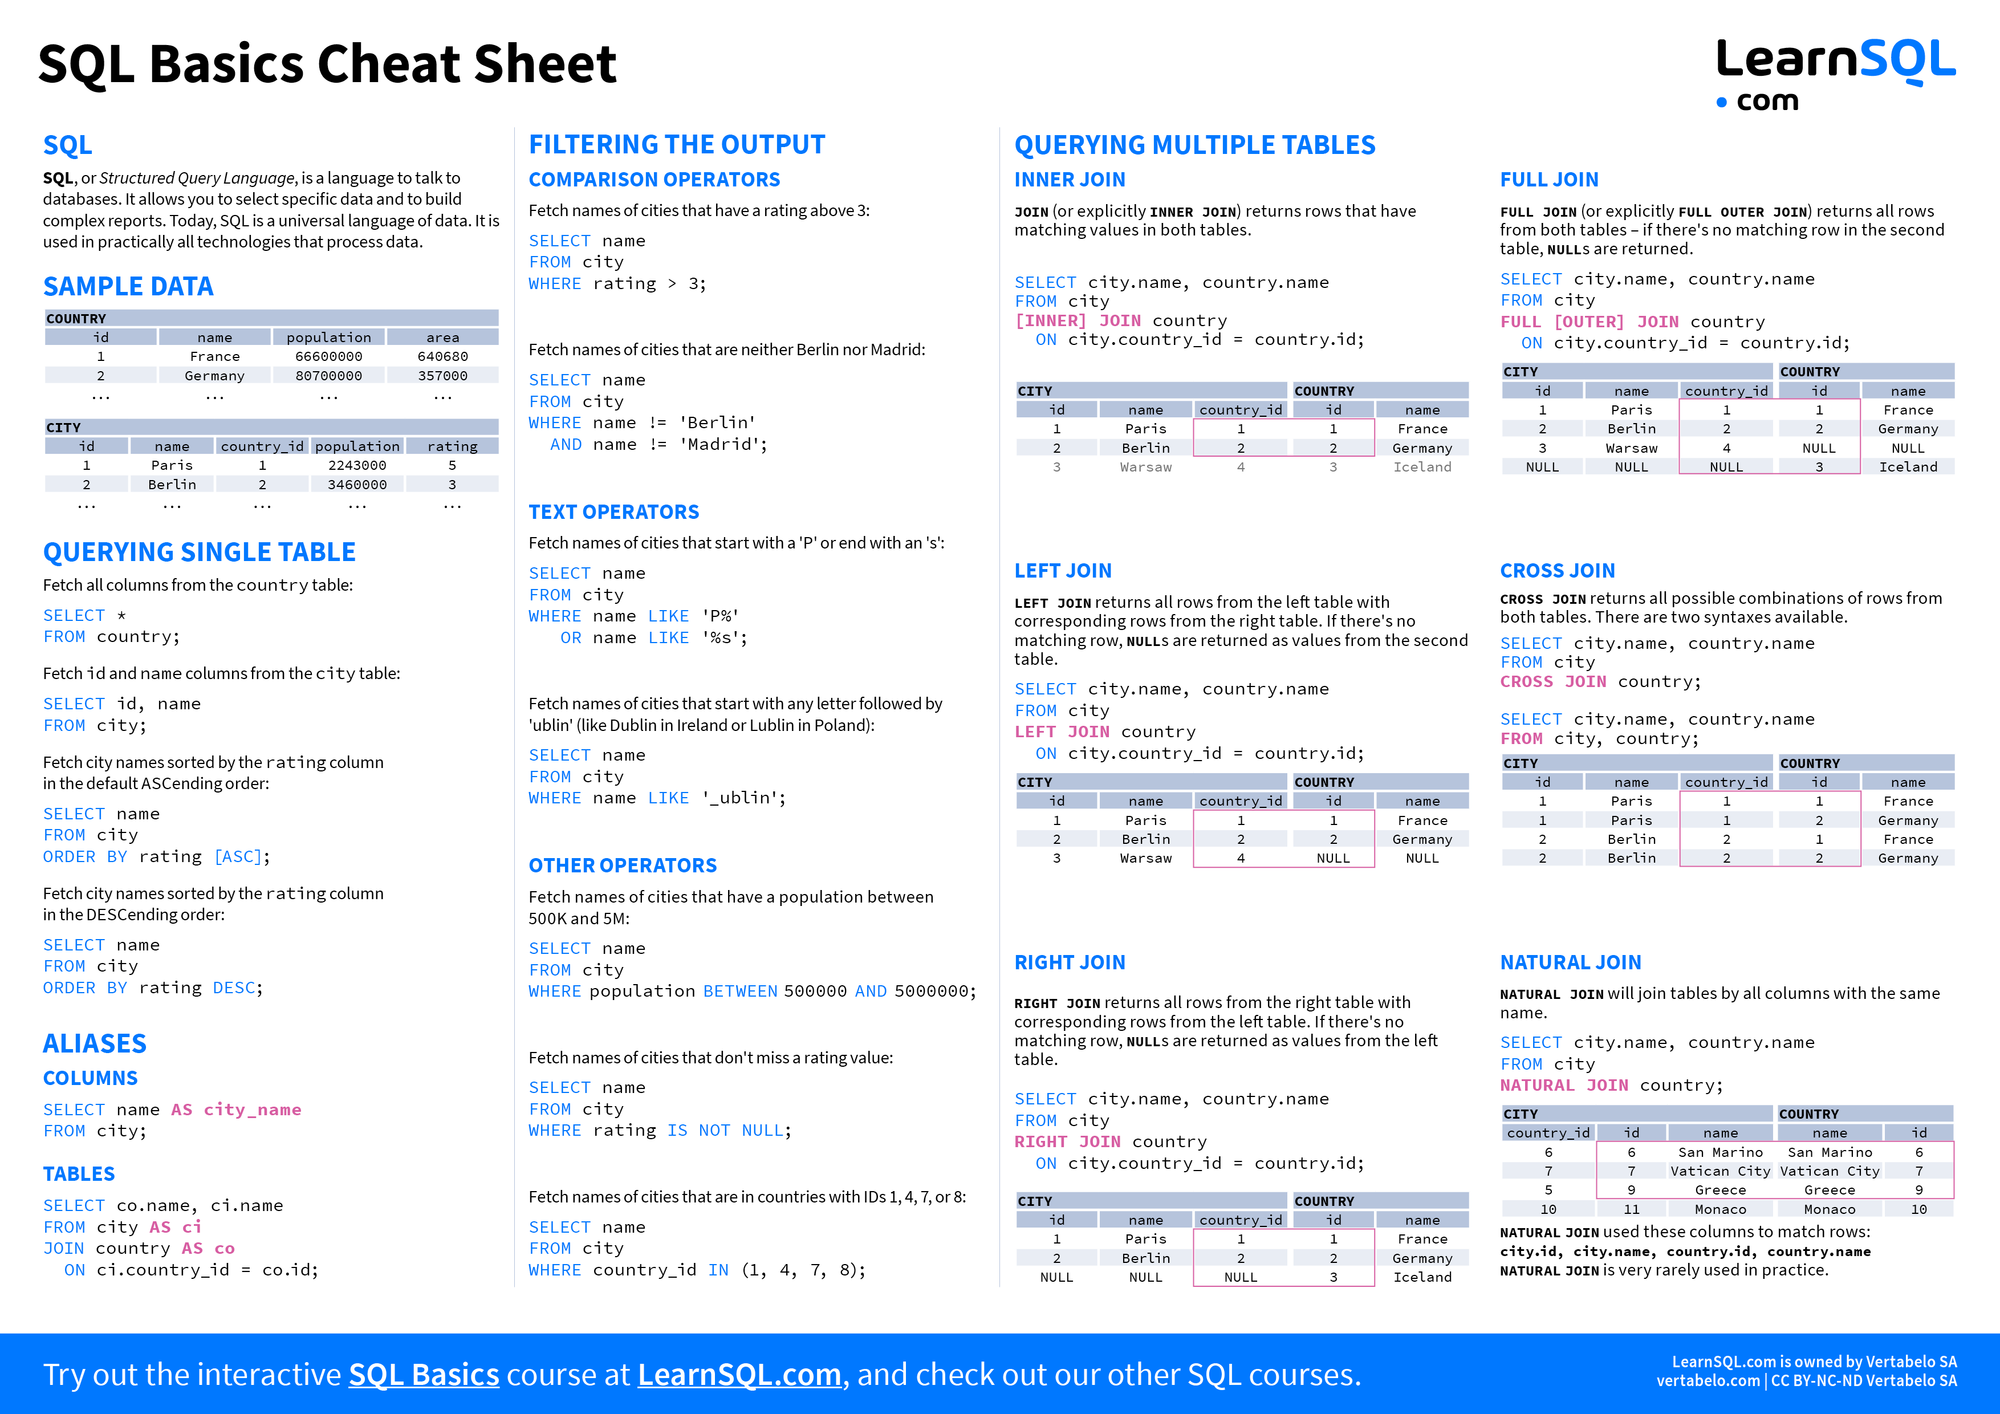 First page of SQL Basics Cheat Sheet.